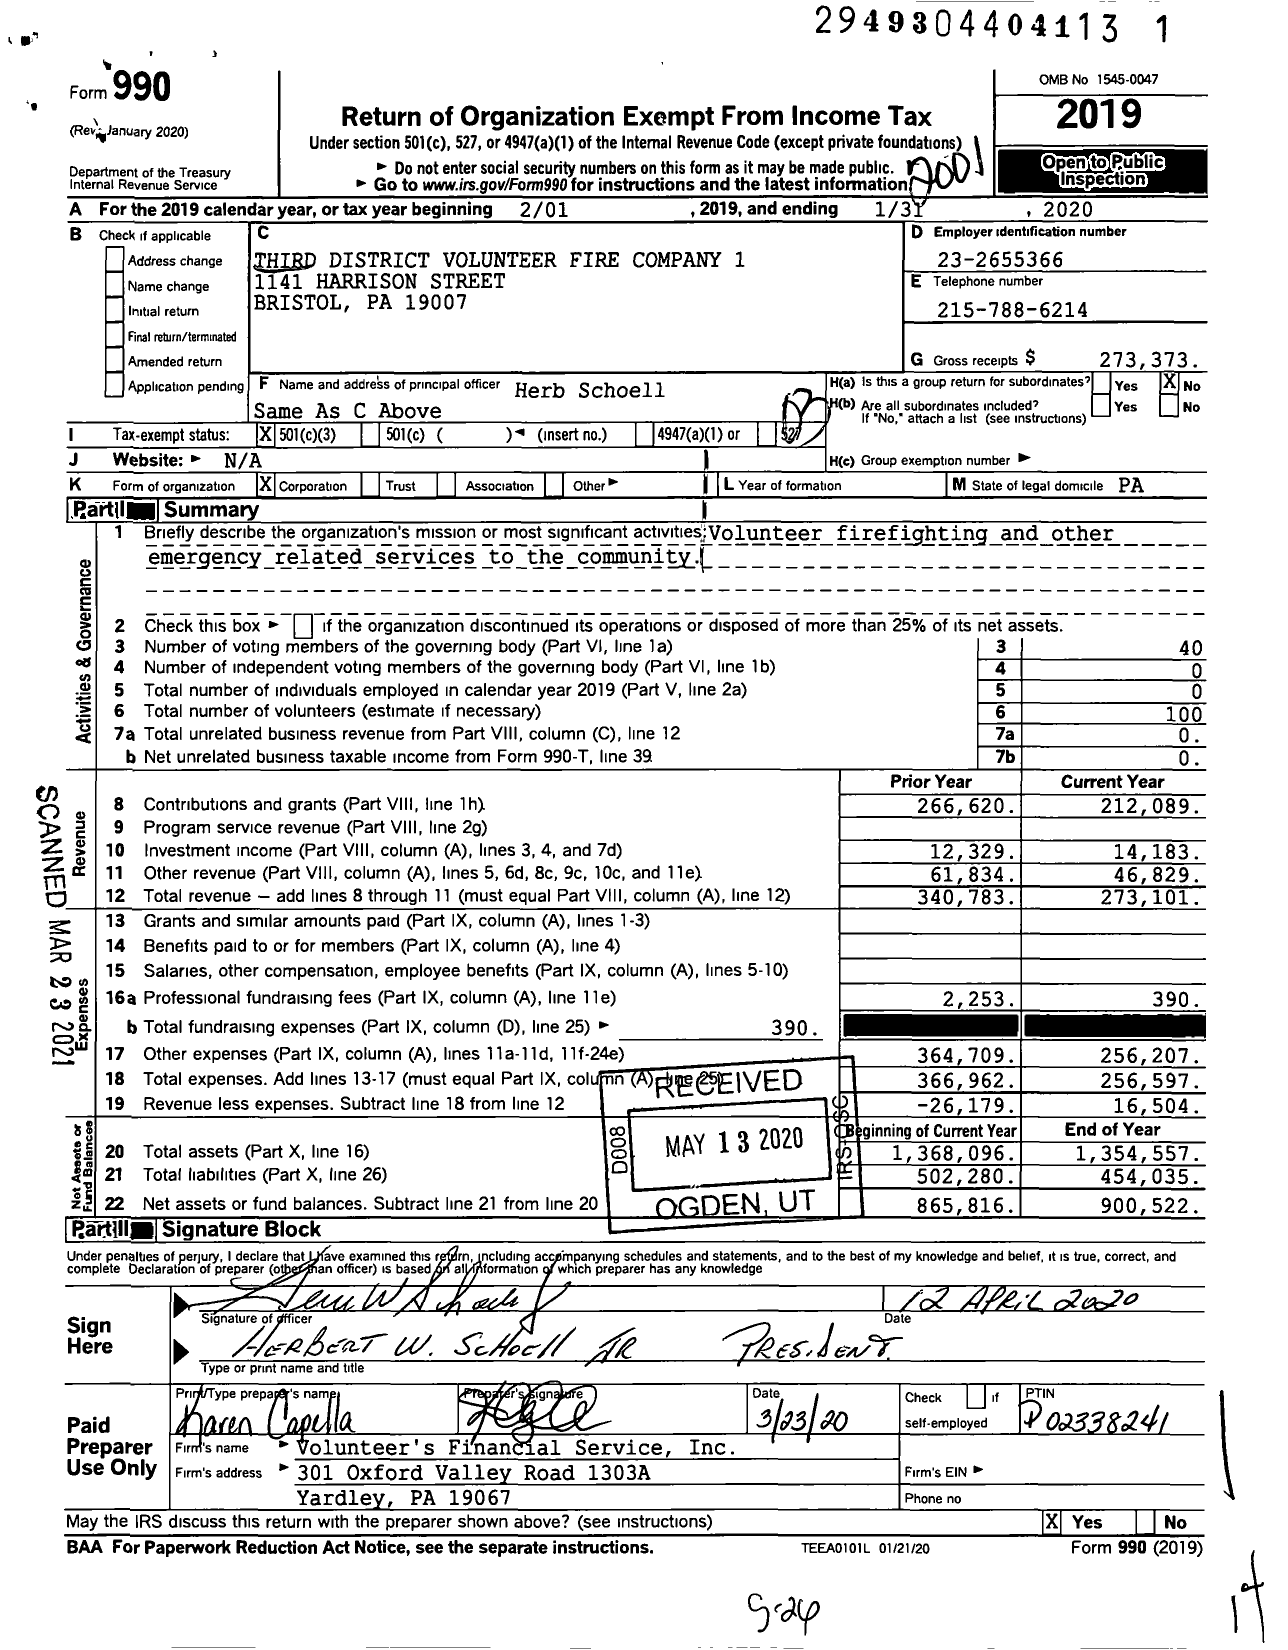 Image of first page of 2019 Form 990 for Third District Volunteer Fire Company No 1